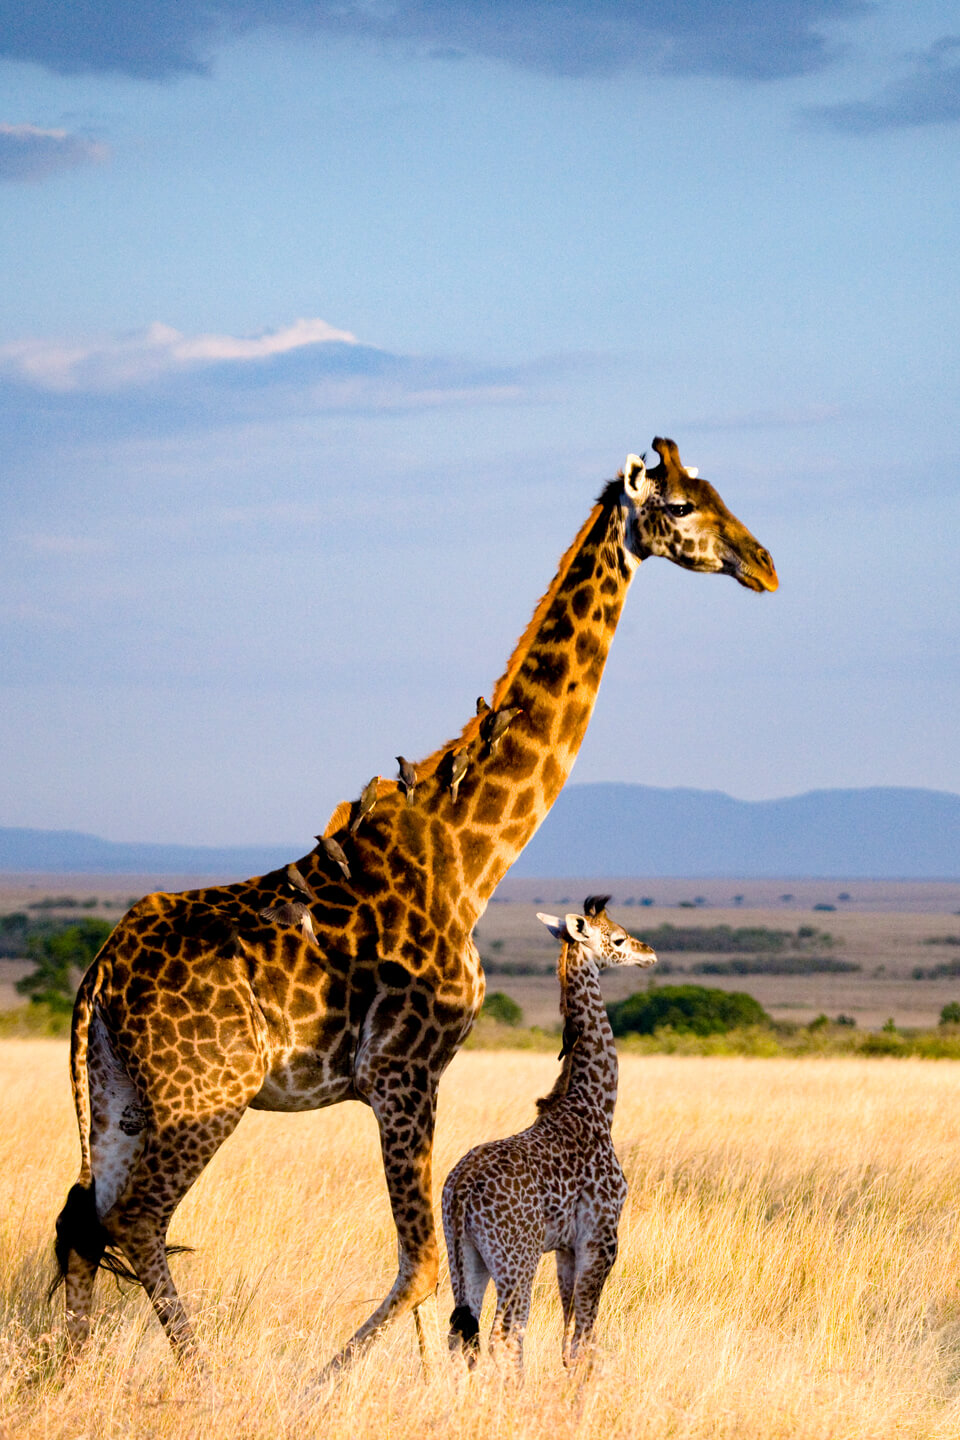 A giraffe with its baby in Kidepo Valley National Park